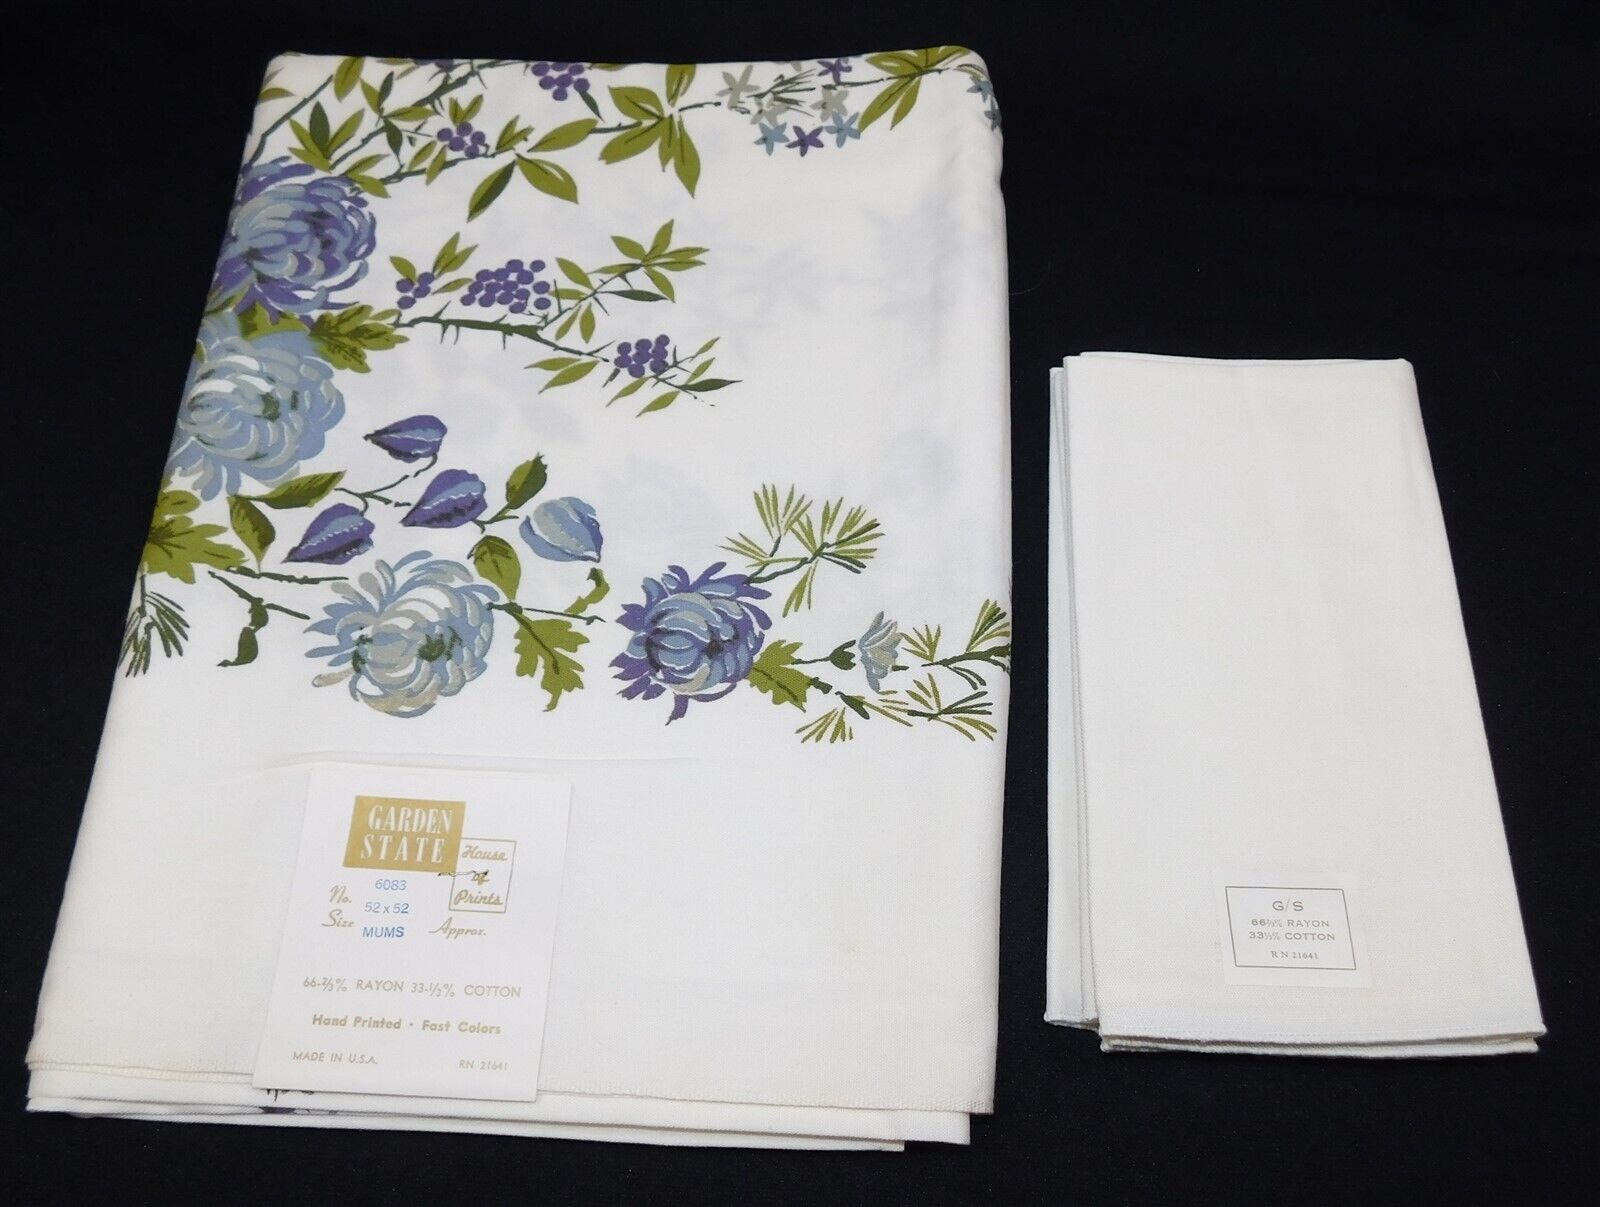 NOS Vtg Garden State Blue Mums Tablecloth & 4 Napkins 52 x 52 NEW 6083 In Box